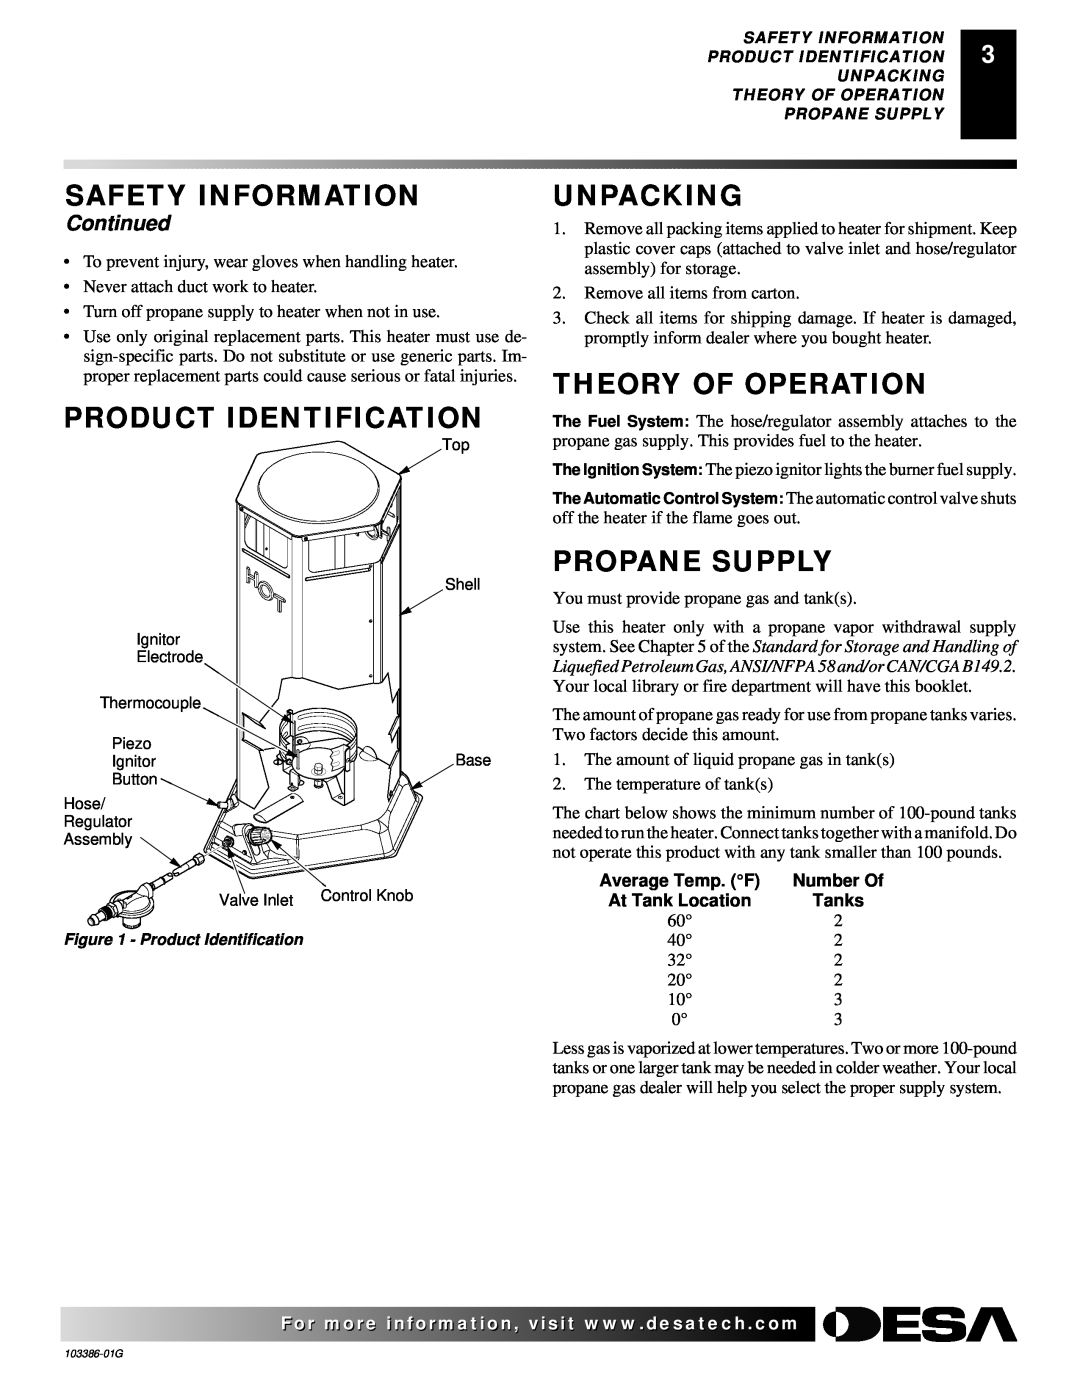 Desa 200 Product Identification, Unpacking, Theory Of Operation, Propane Supply, Continued, Safety Information, Number Of 